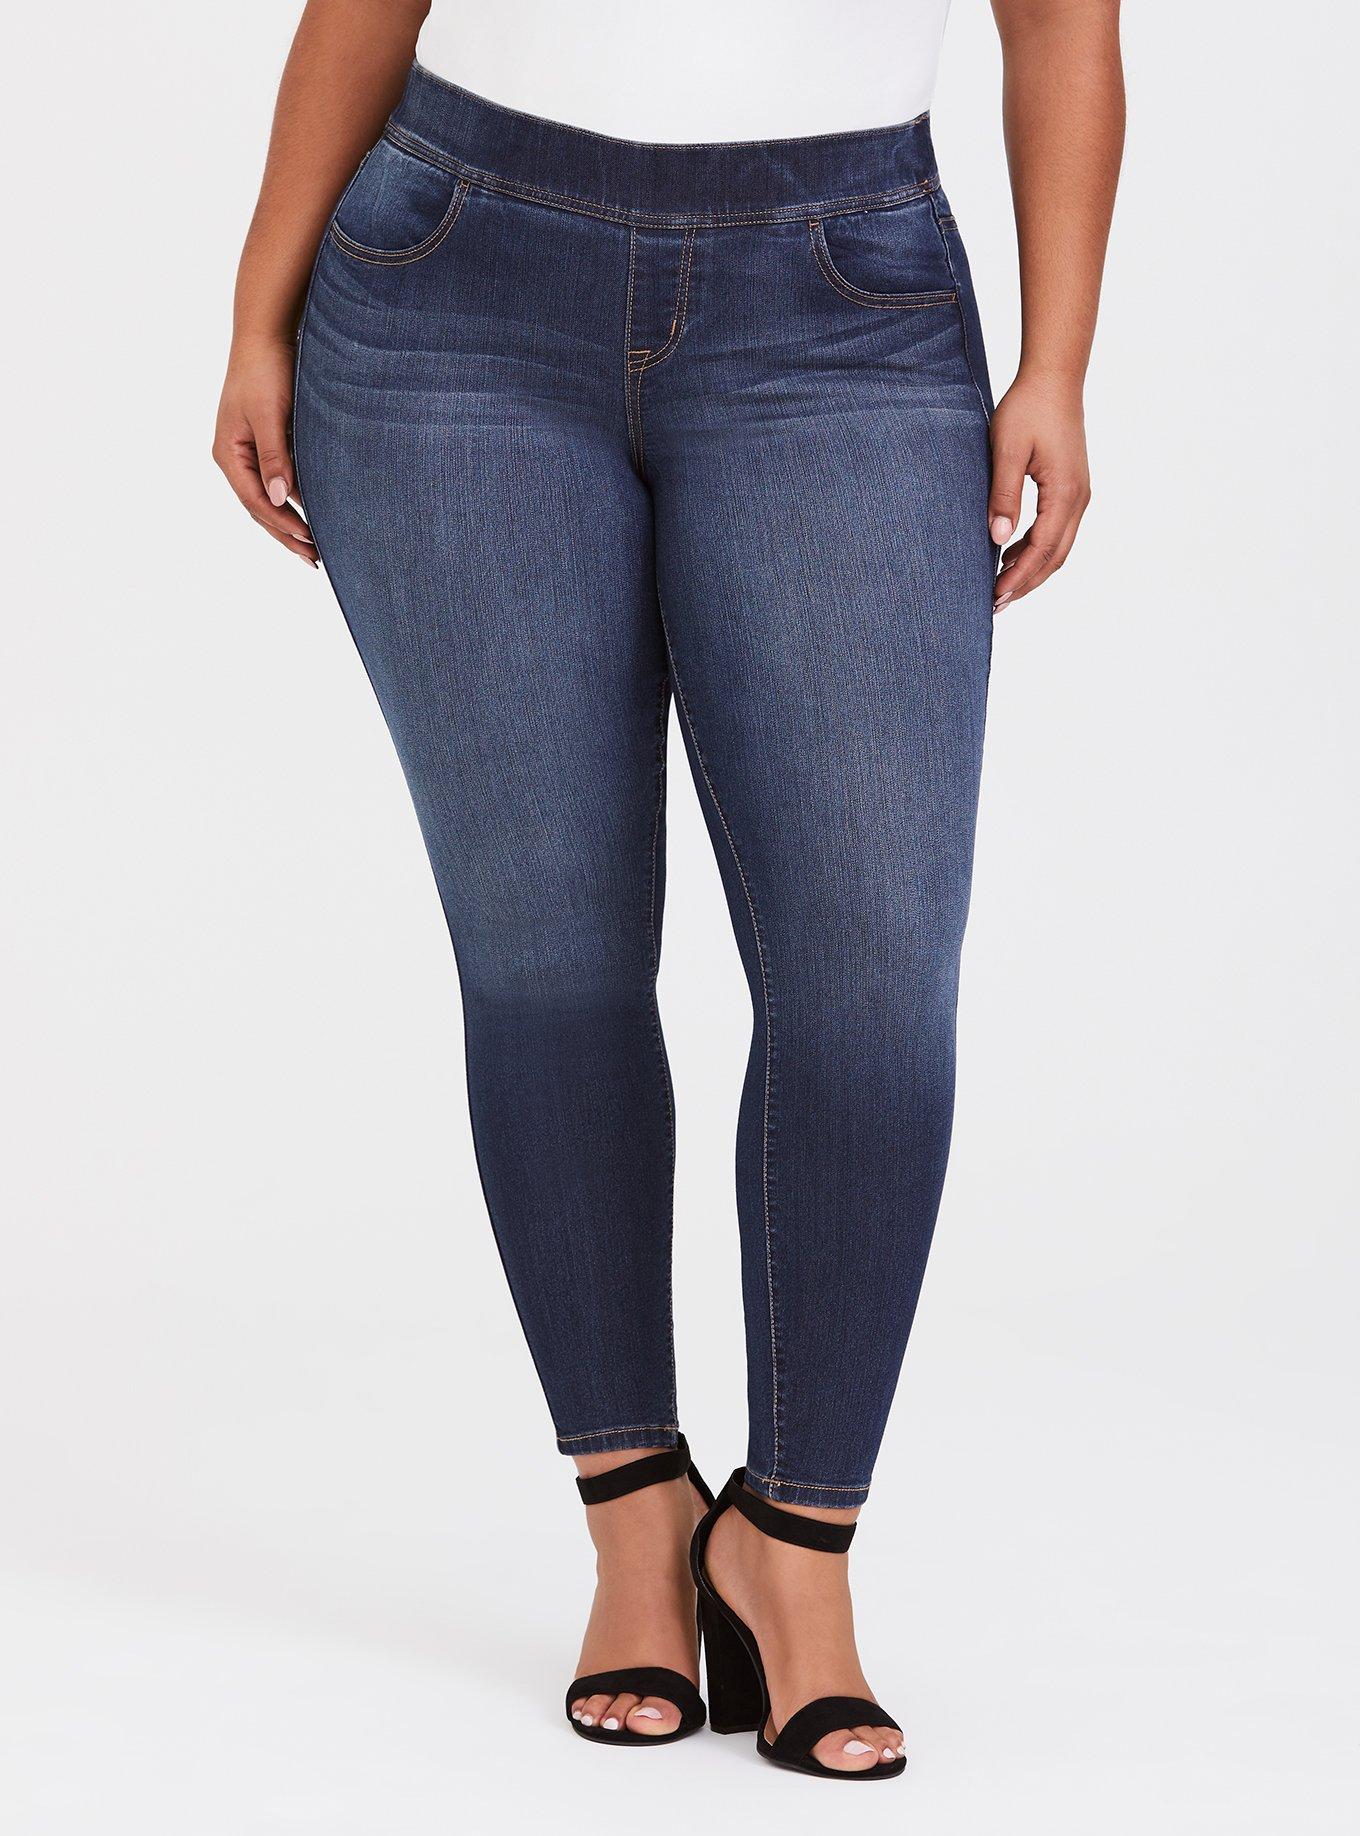 Buy We The Free Modern Love Pull-on Jeans - Earthy Blue At 52% Off